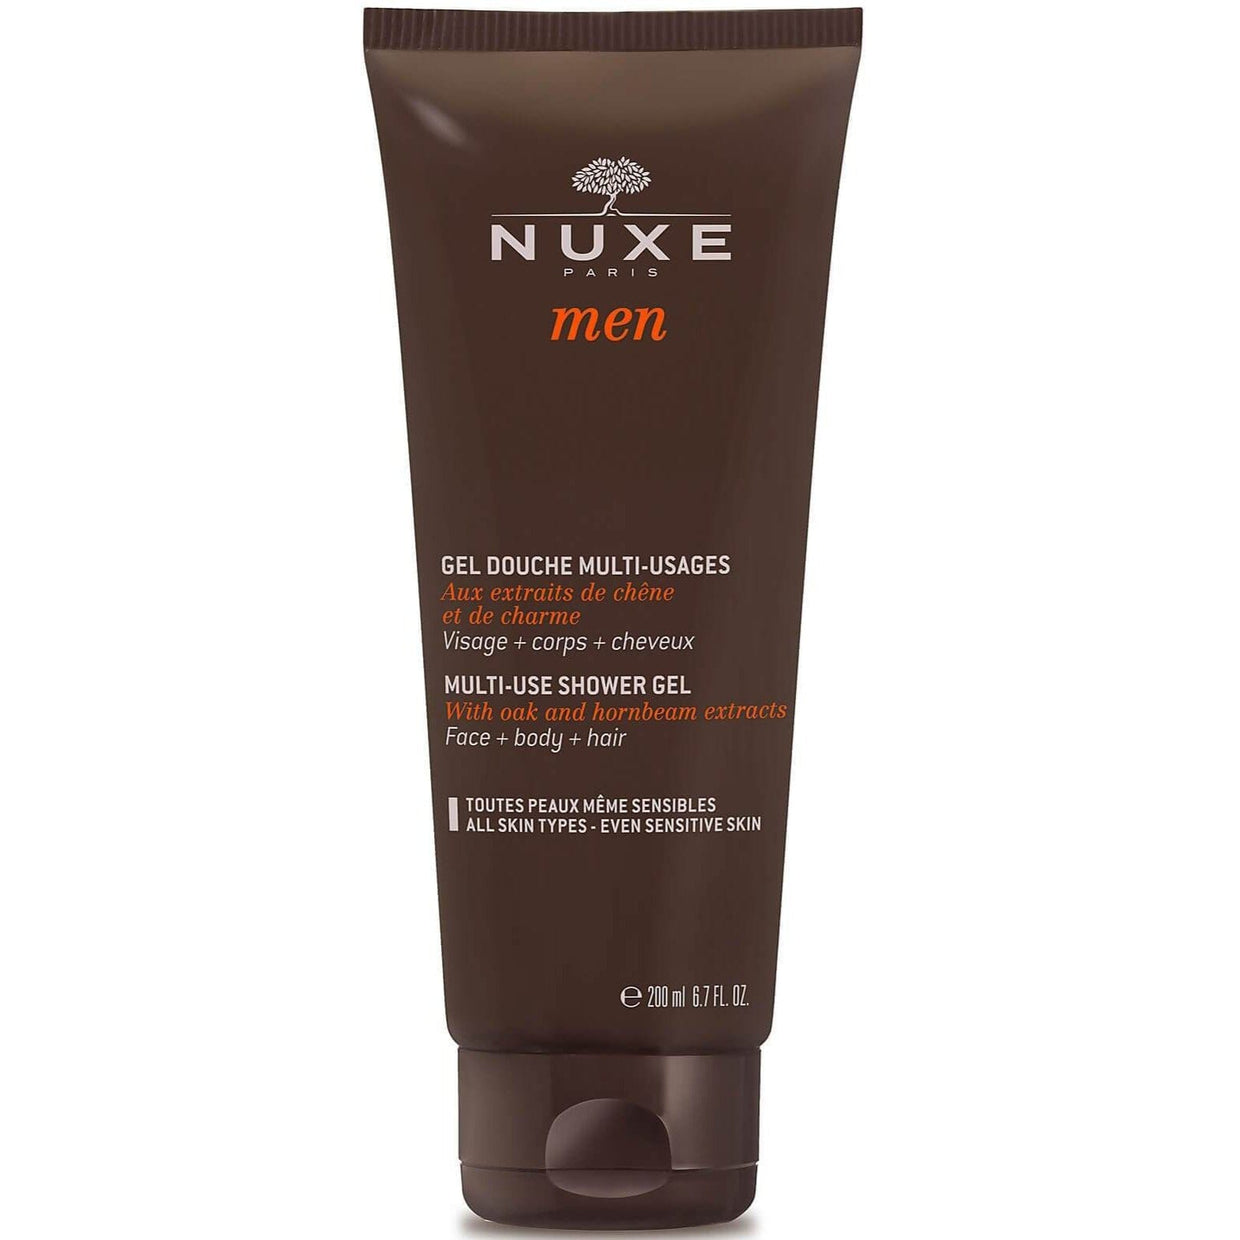 Nuxe Men's Multi-Use Shower Gel Nuxe 200 ml Shop at Exclusive Beauty Club